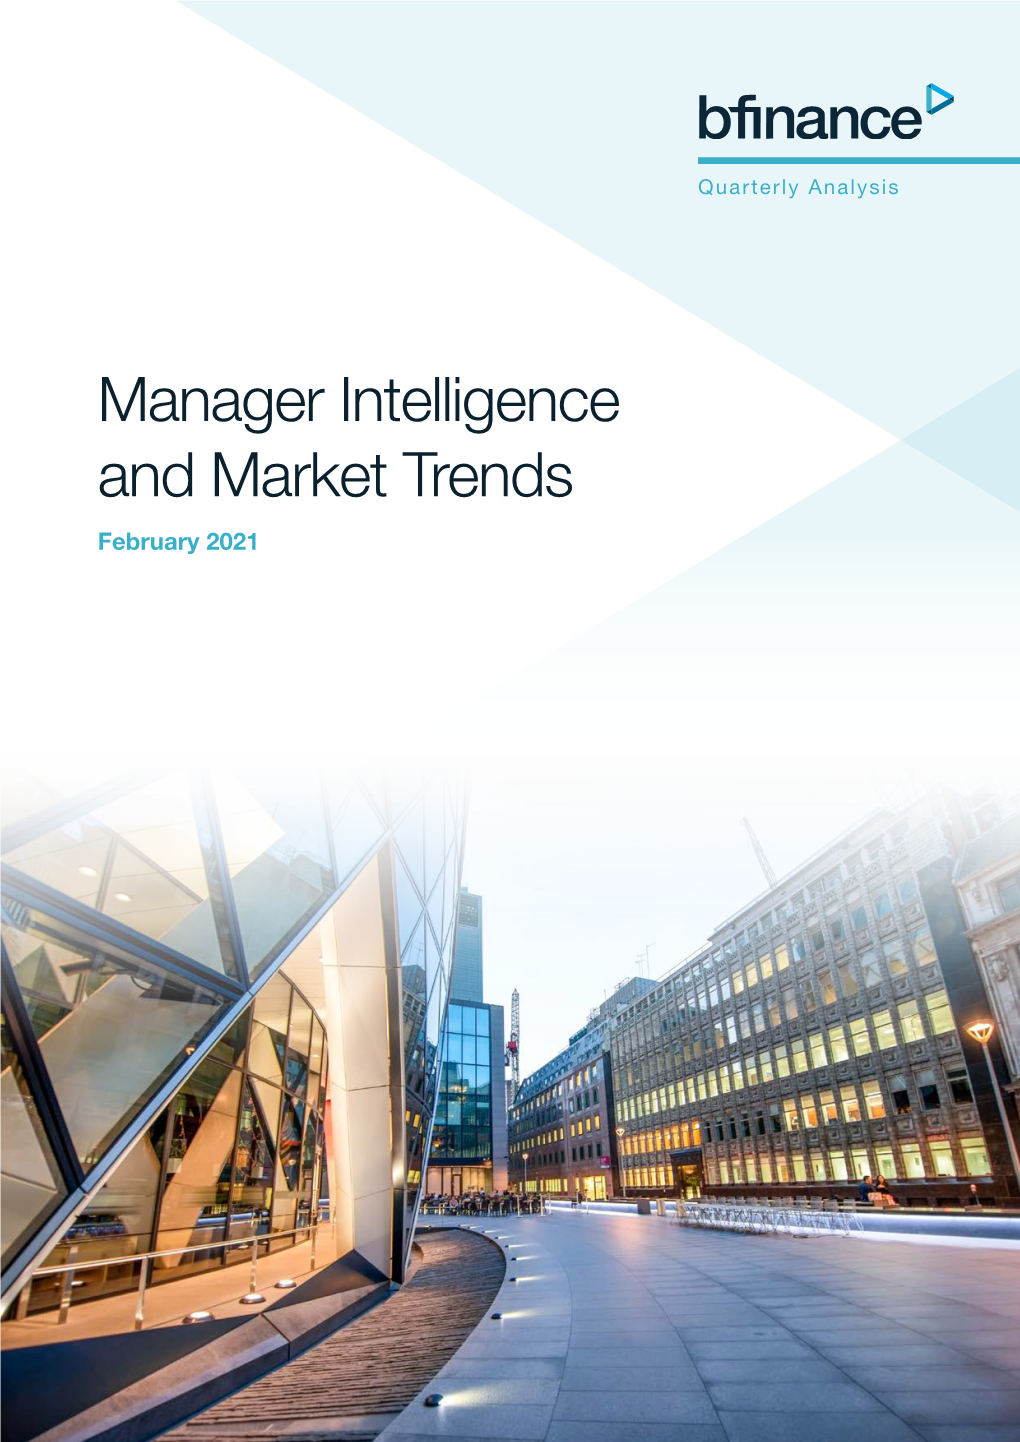 Manager Intelligence and Market Trends February 2021 Contents